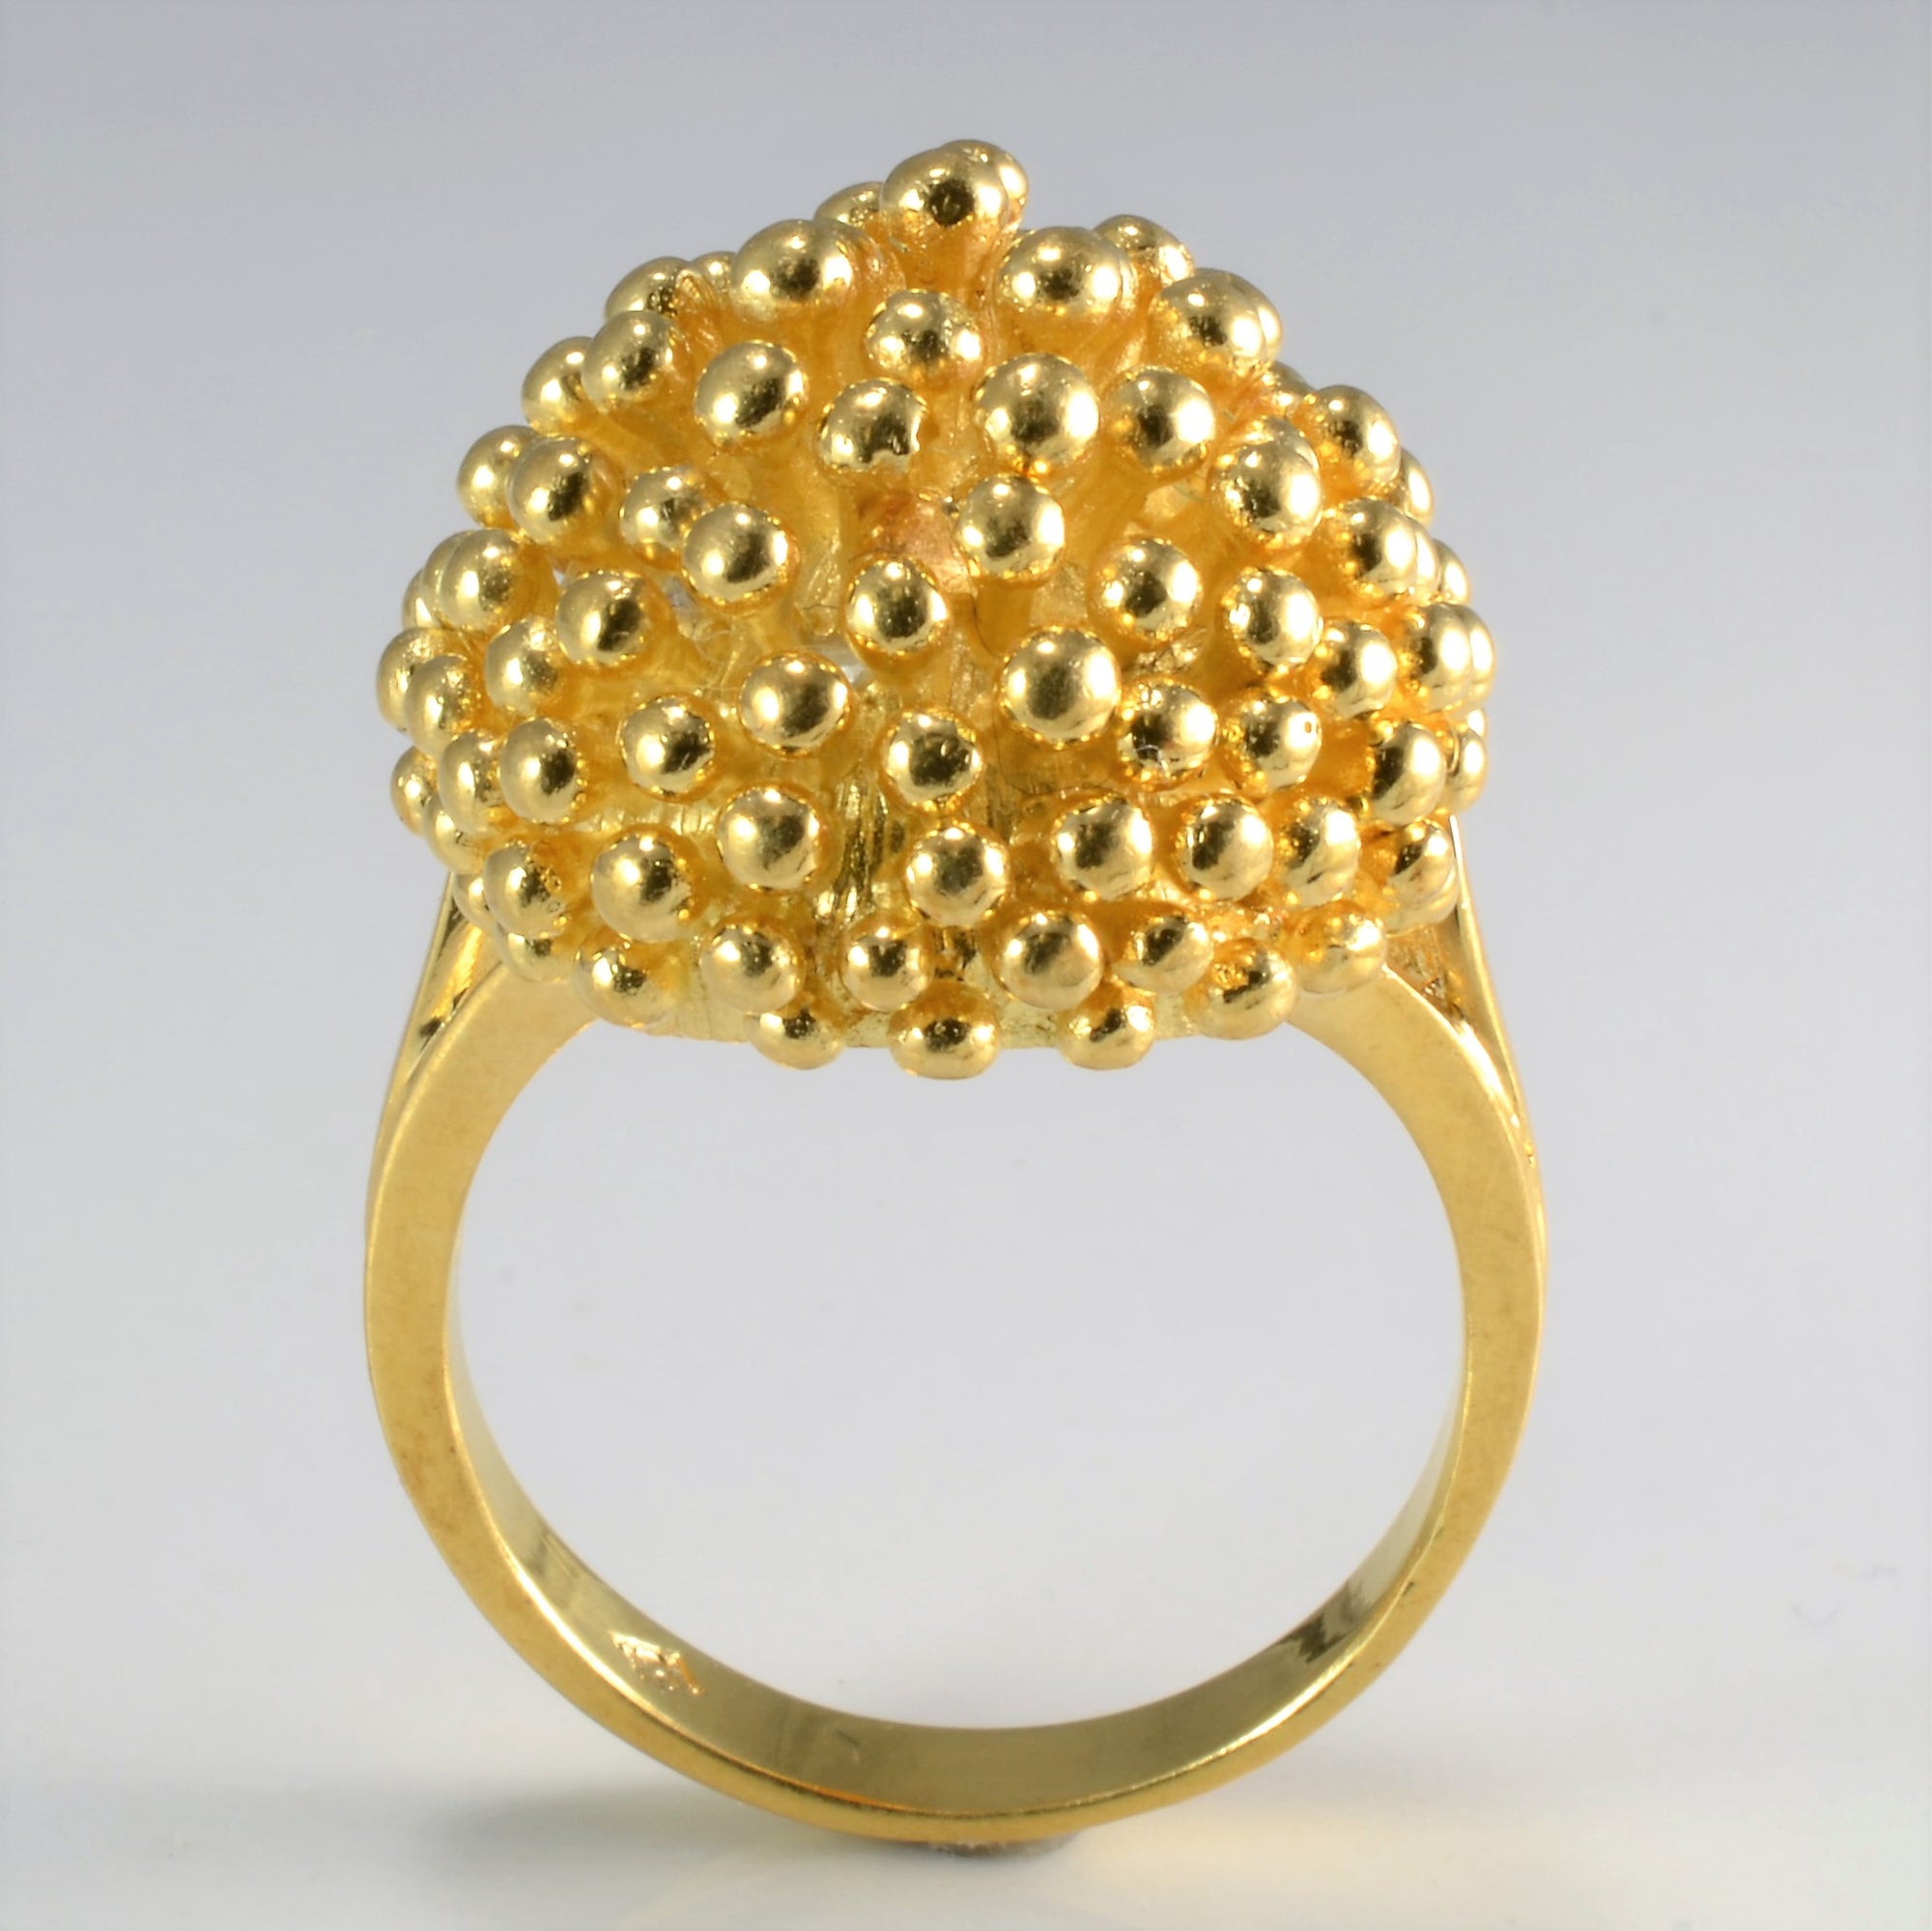 Heavy Cluster Beads Dome Ring | SZ 8.5 |